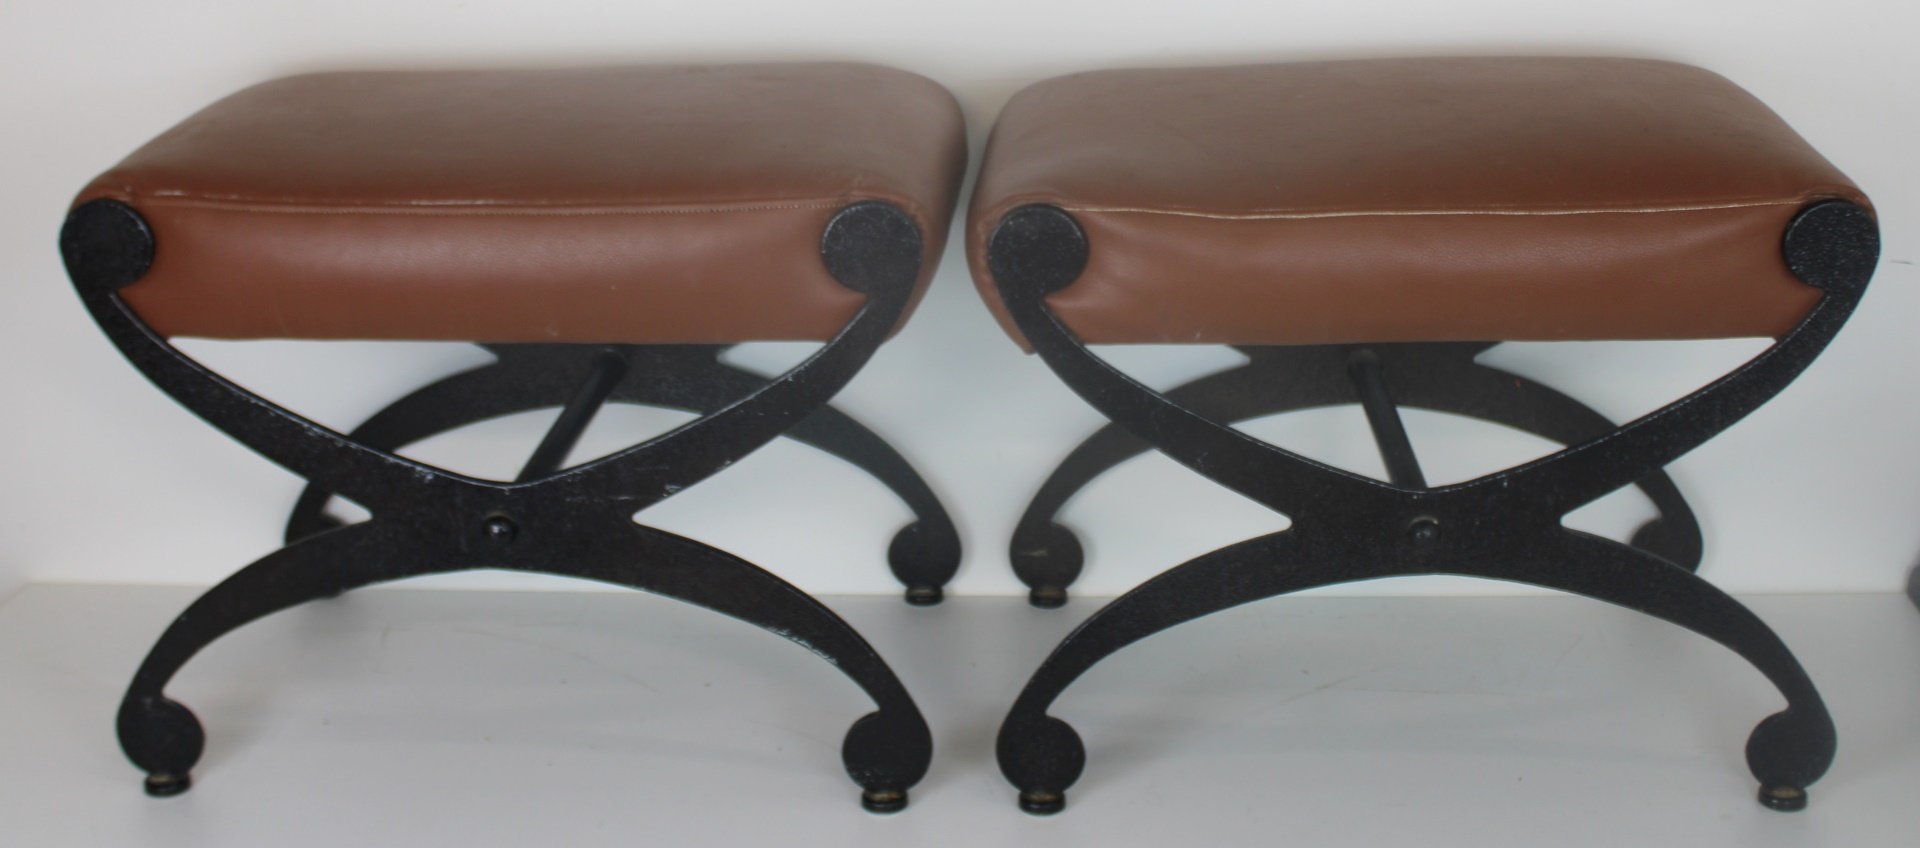 PAIR OF UPHOLSTERED NEOCLASSICAL 3bac88